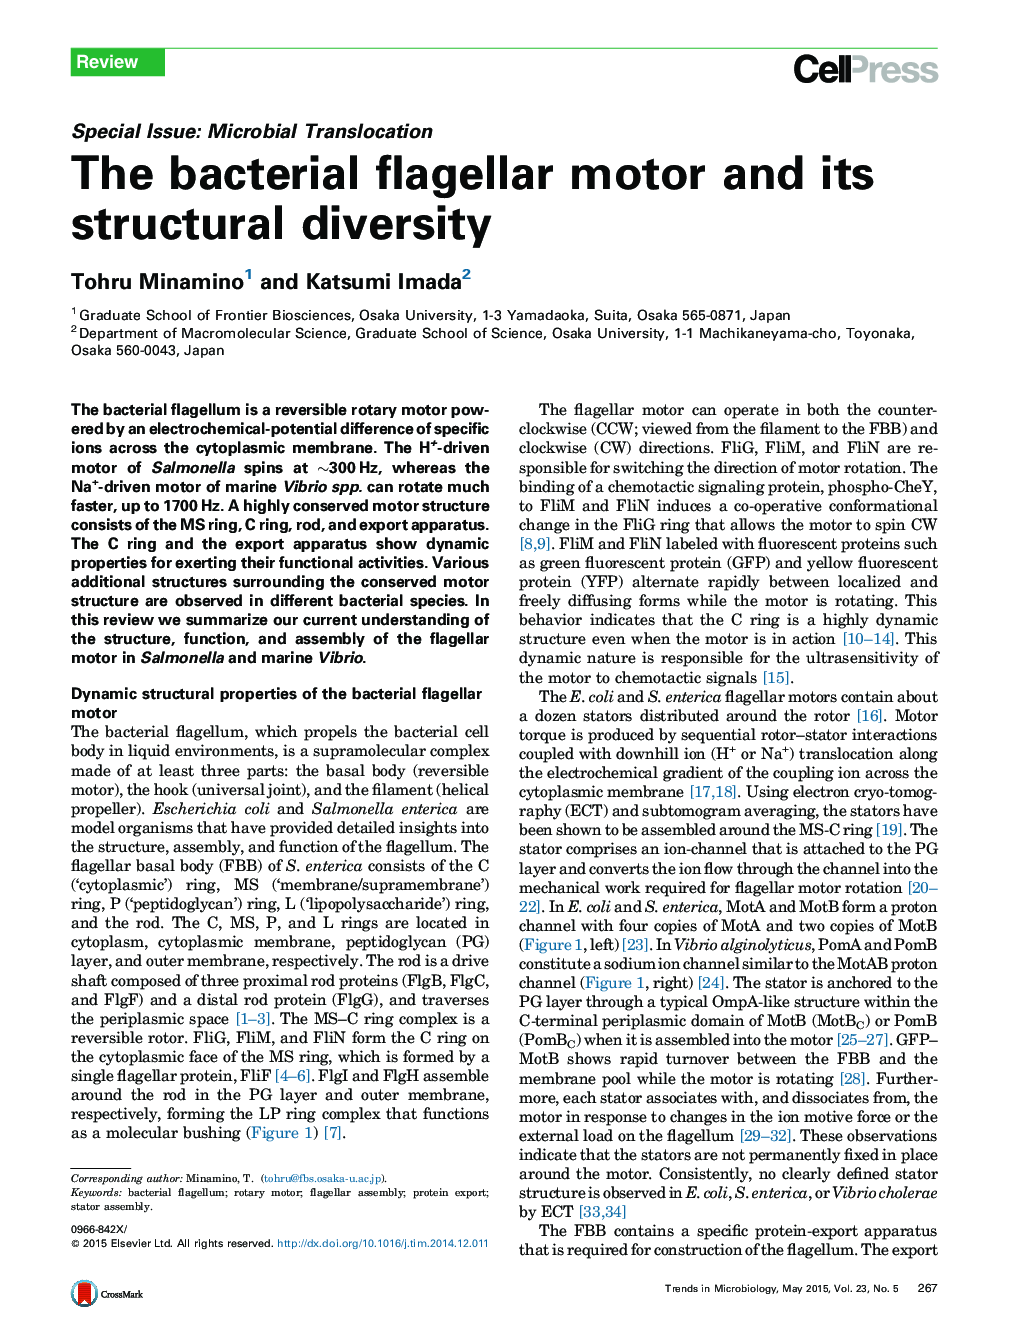 The bacterial flagellar motor and its structural diversity